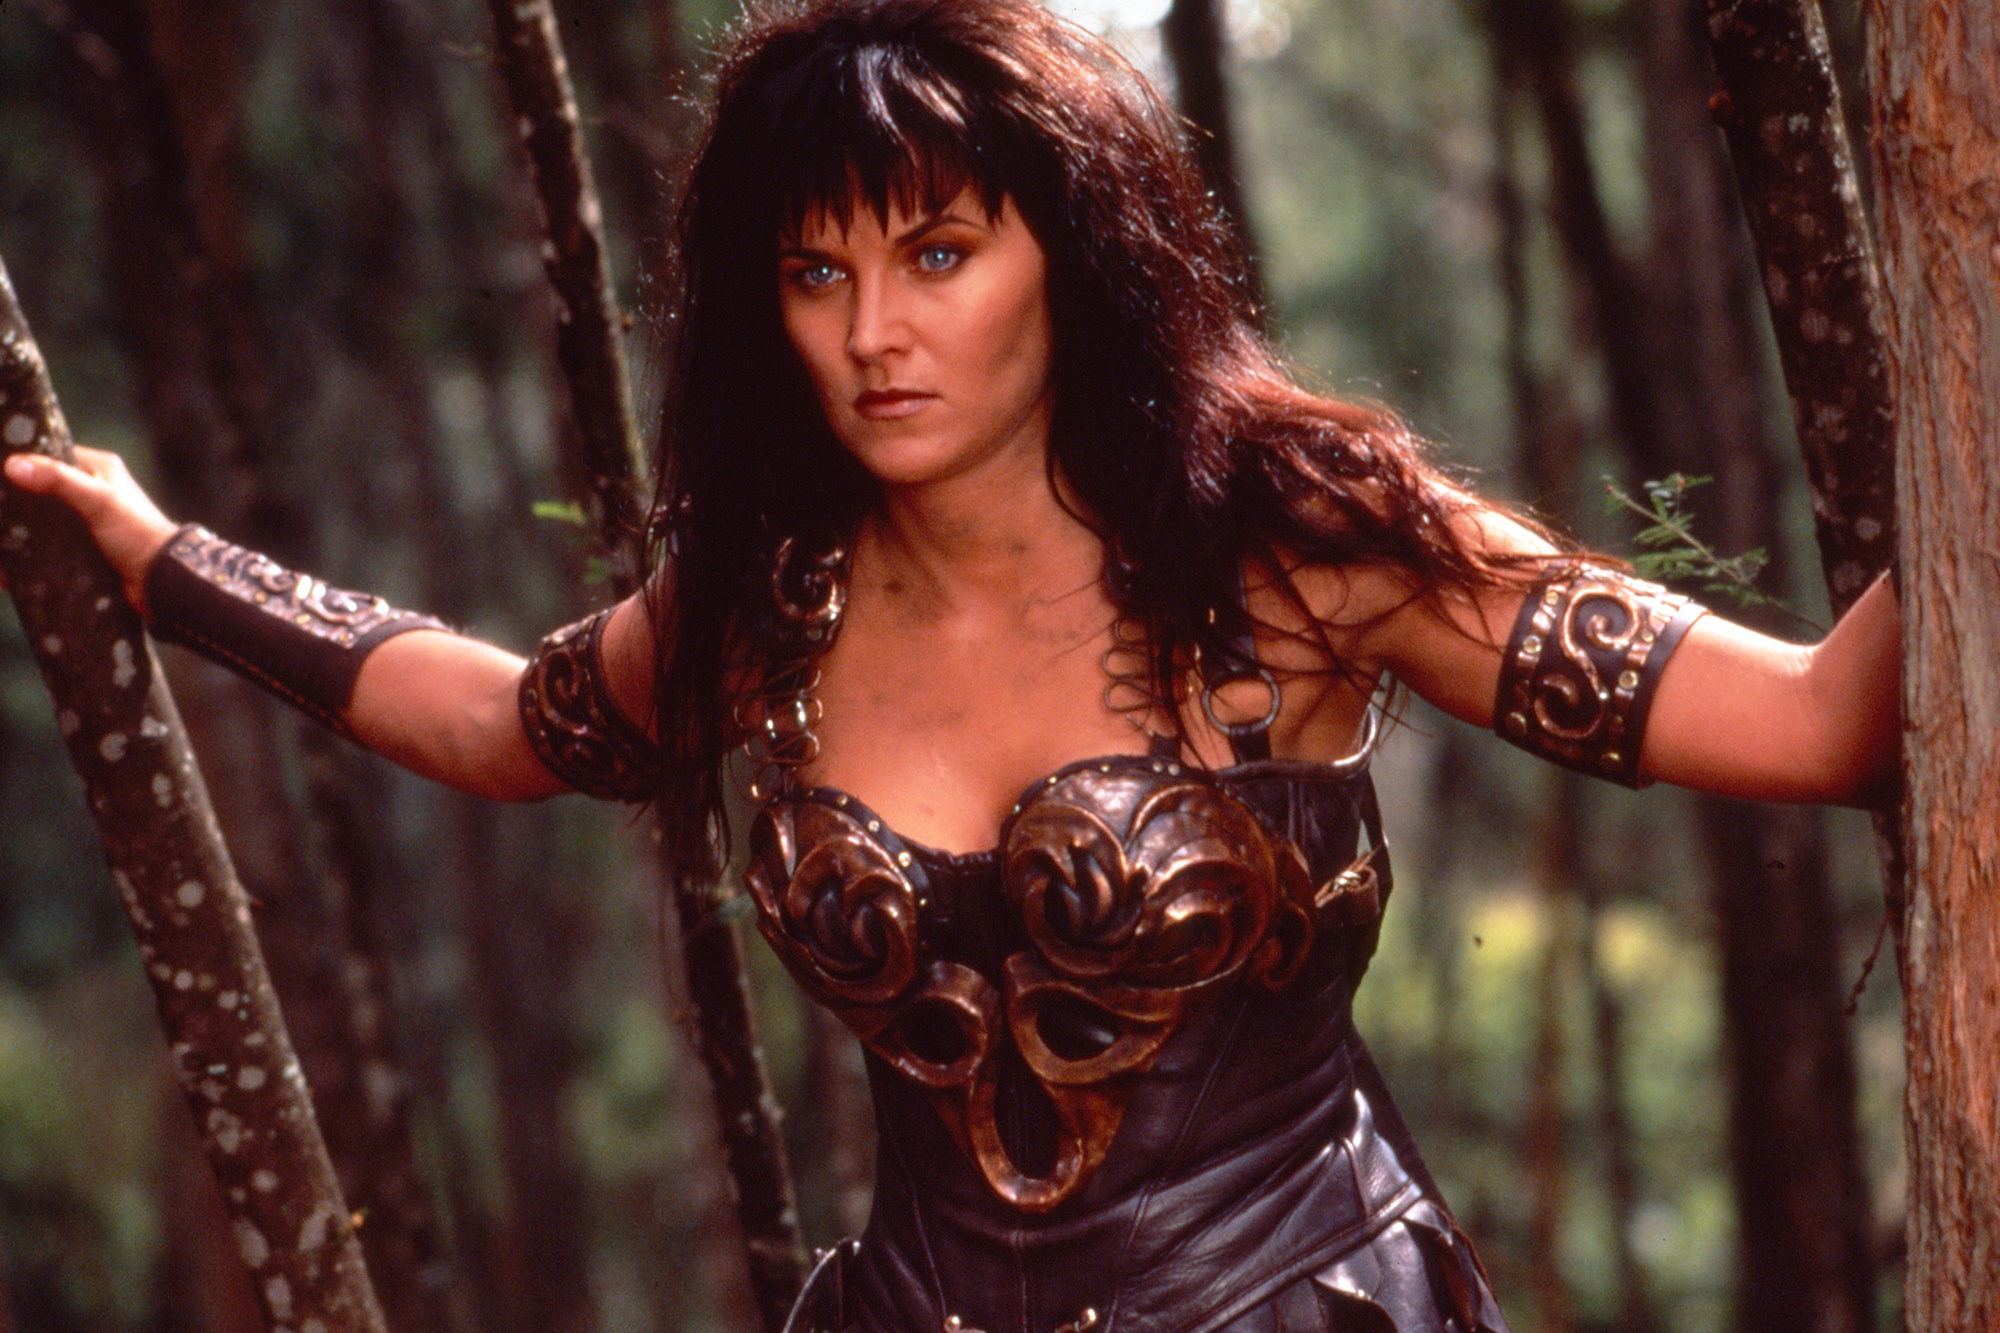 Lucy Lawless: Xena, A fictional character from Robert Tapert's “Xena: Warrior Princess” franchise. 2000x1340 HD Wallpaper.